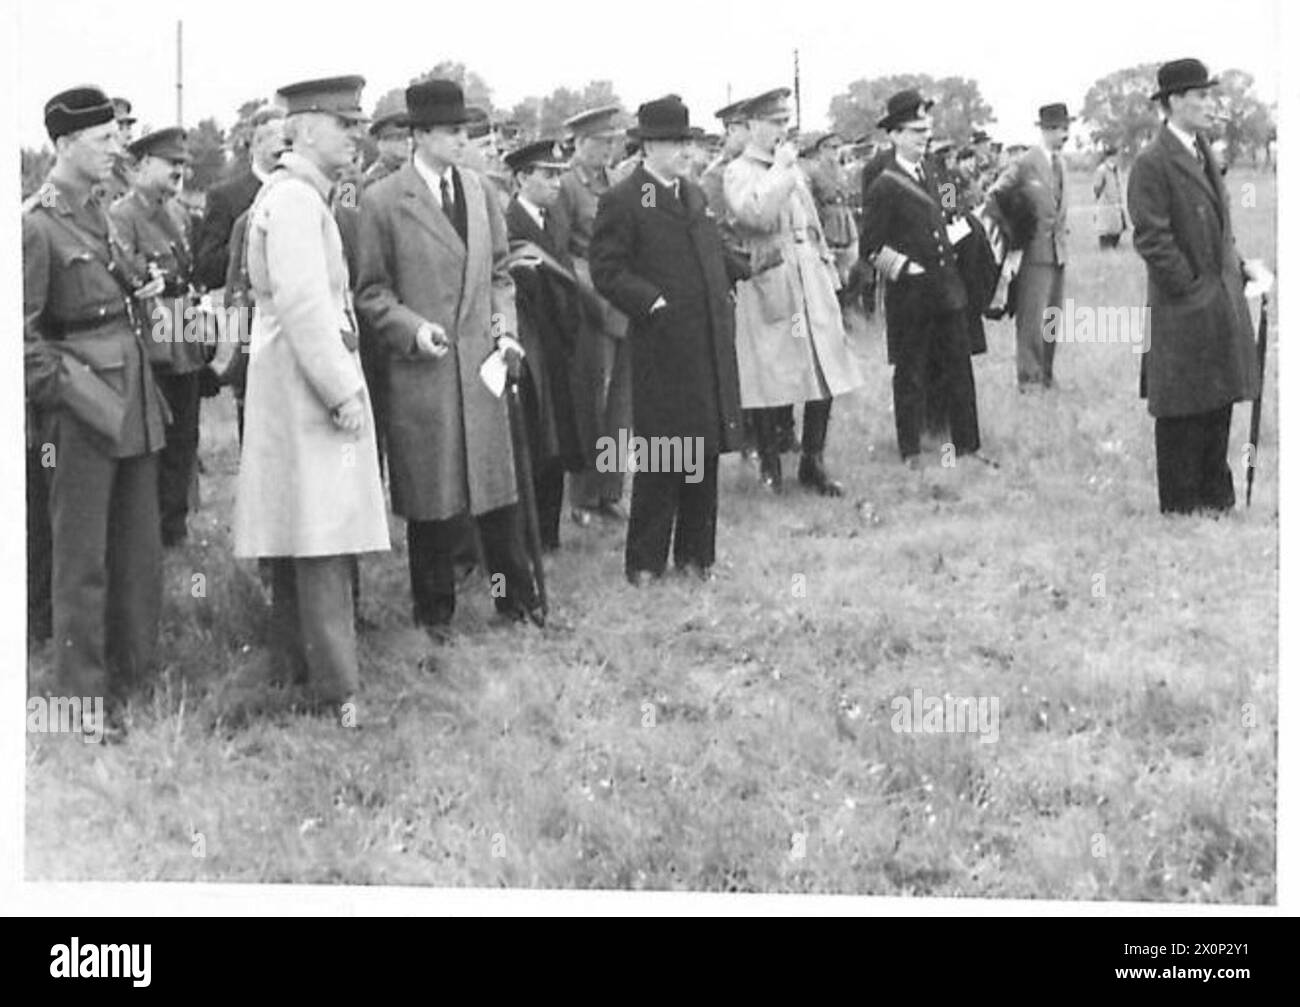 PRIME MINISTER AT GUNNERY DEMONSTRATION - Lord Beaverbrook; Captain D. Margesson; Sir Archibald Sinclair; Admiral of the Fleet Sir Roger Keyes; General Sir John Dill, Chief of the Imperial General Staff; and other officers watching the demonstration. Photographic negative , British Army Stock Photo